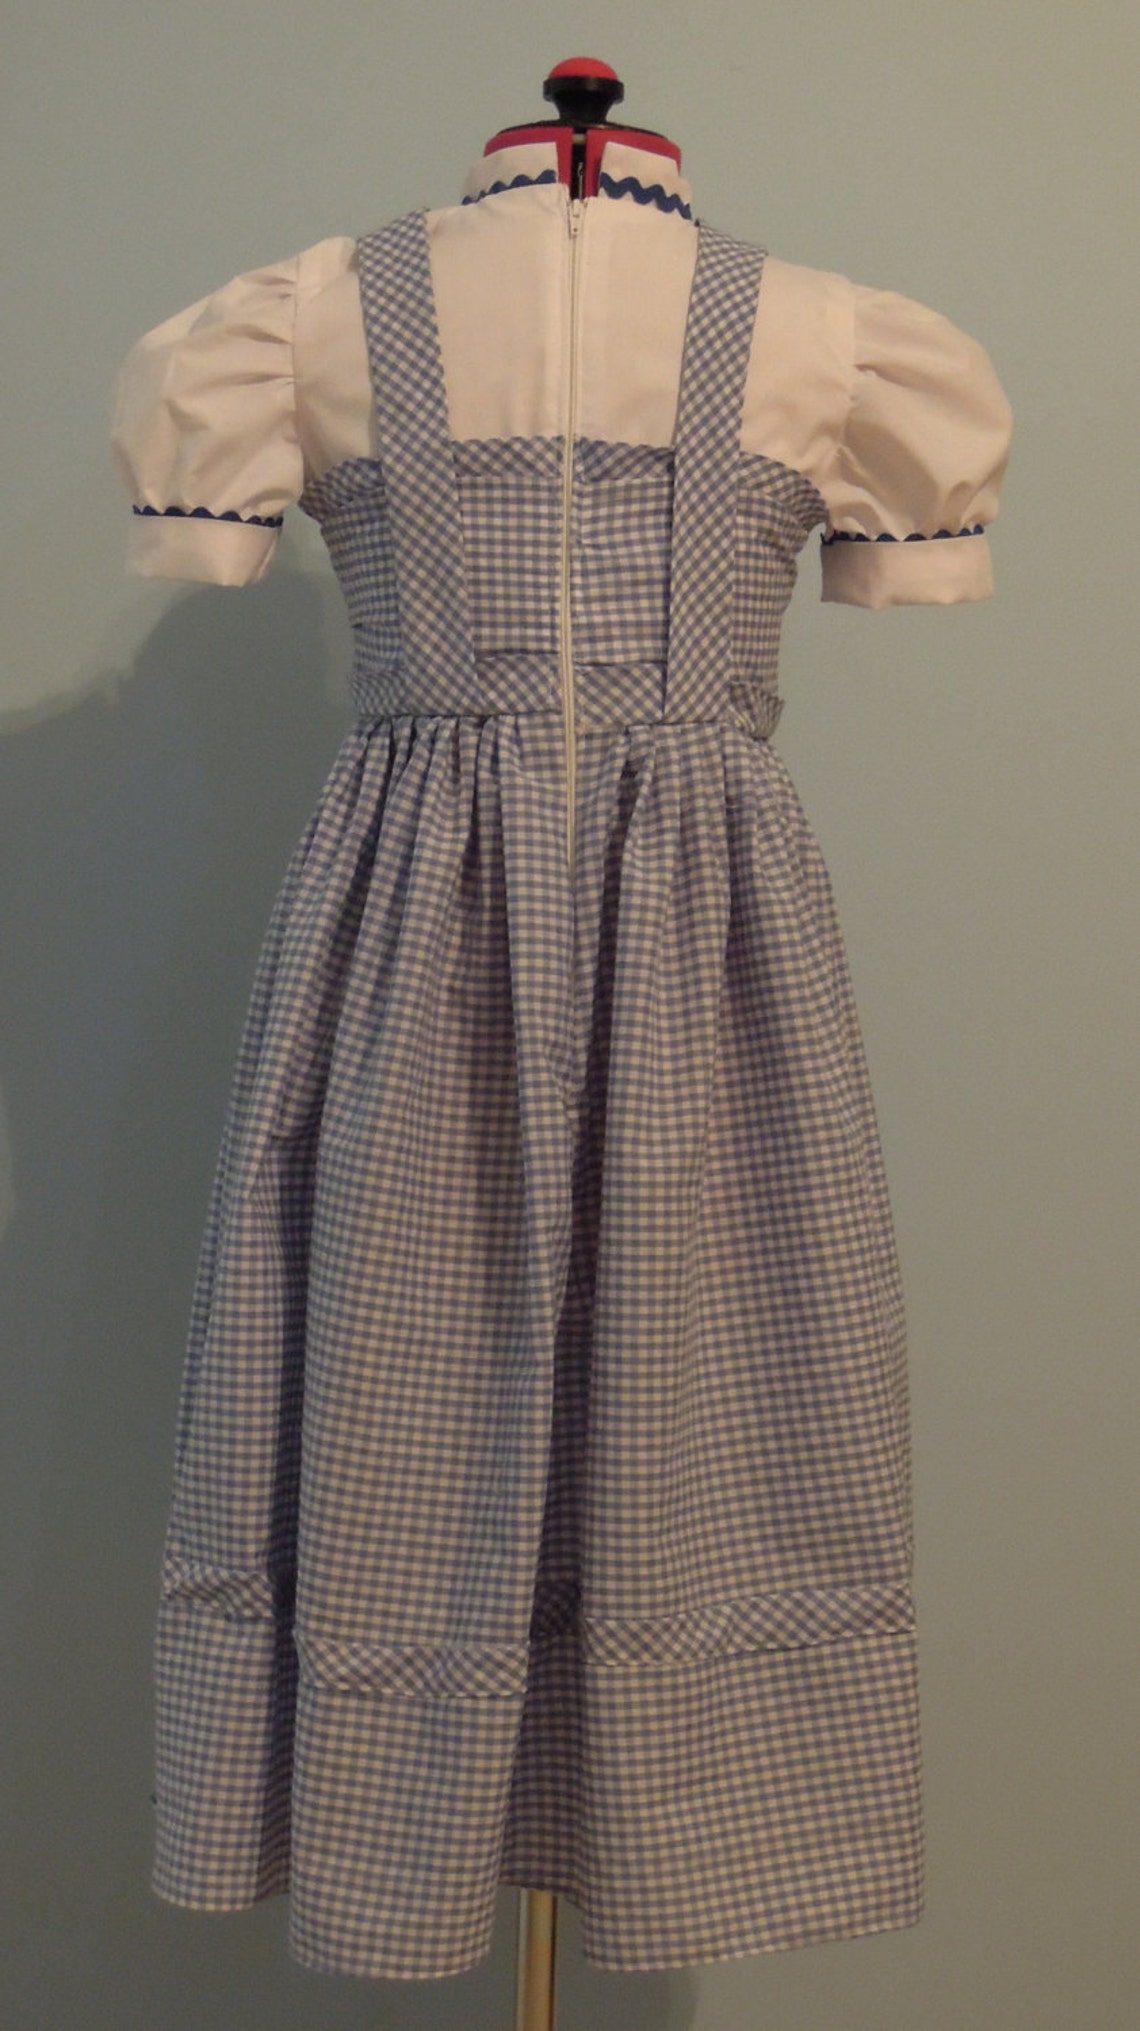 Dorothy Dress from Wizard of Oz. Available sizes 6M to child | Etsy